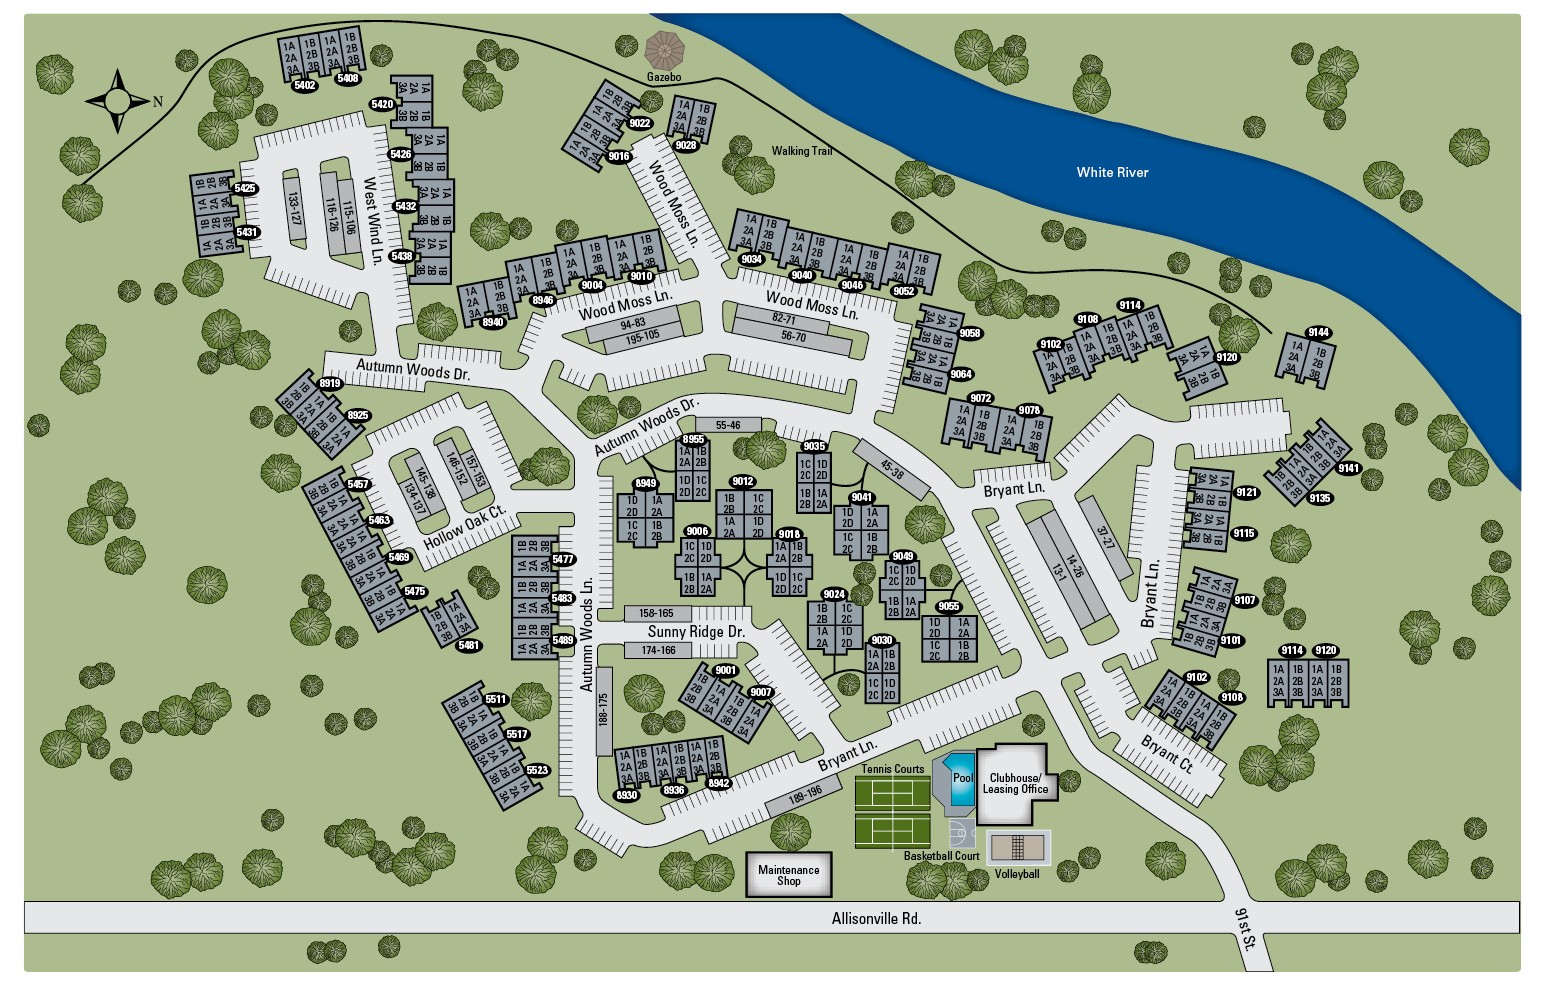 "This community map shows the layout of apartments for TGM Autumn Woods Apartments in Indianapolis, IN "